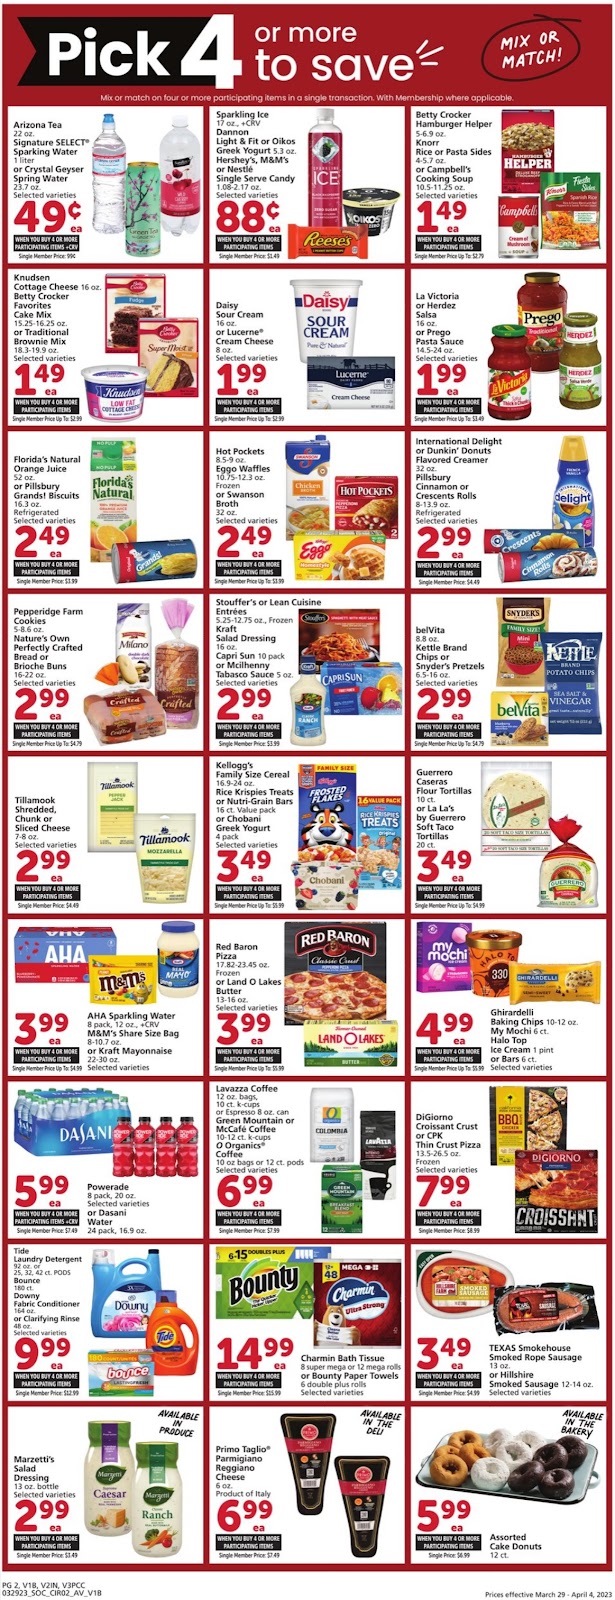 Vons Weekly Ad - 2